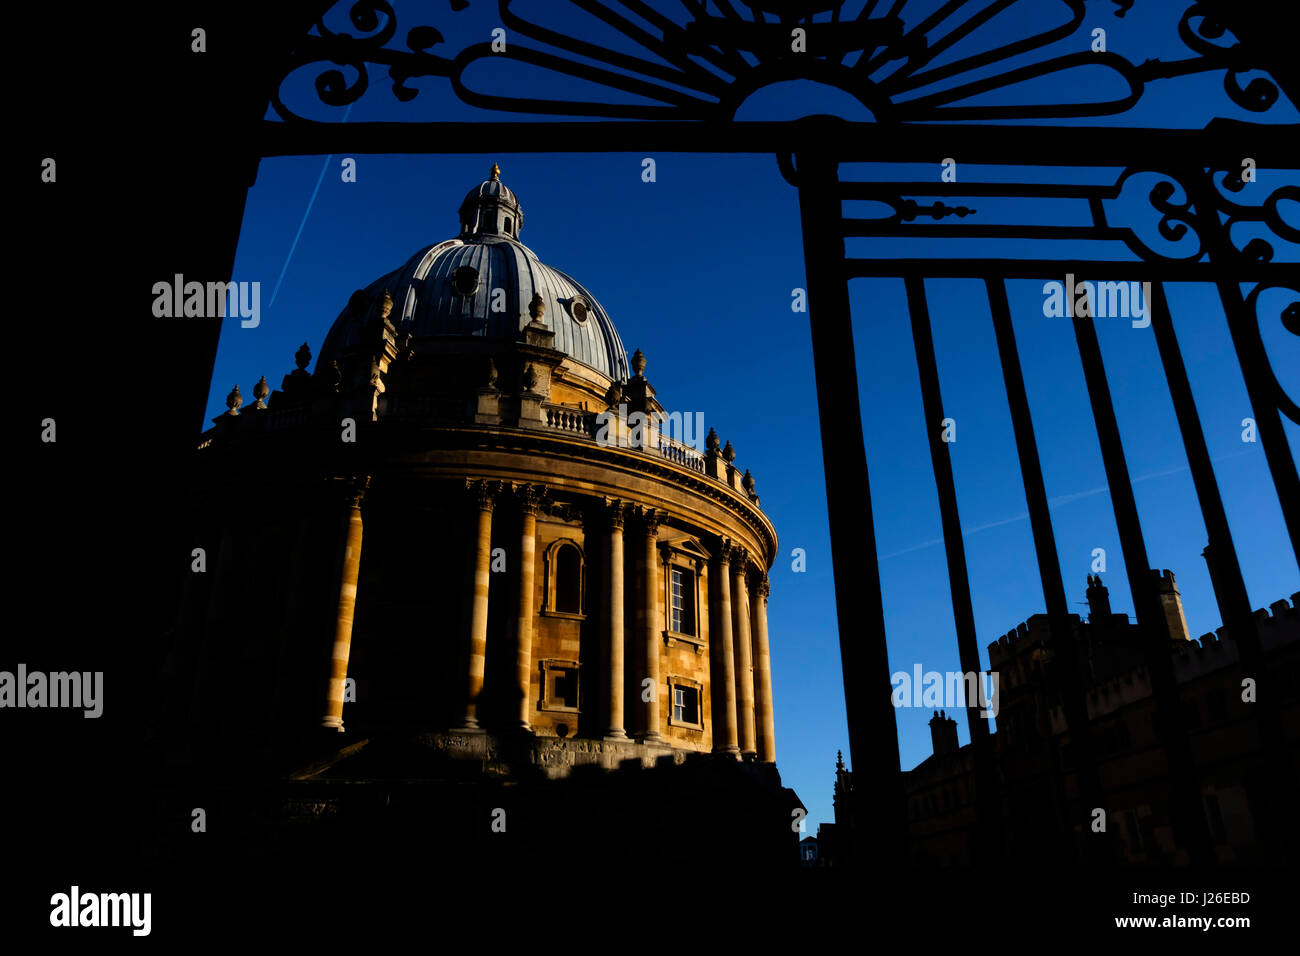 Radcliffe Camera building at Oxford, England, UK Stock Photo